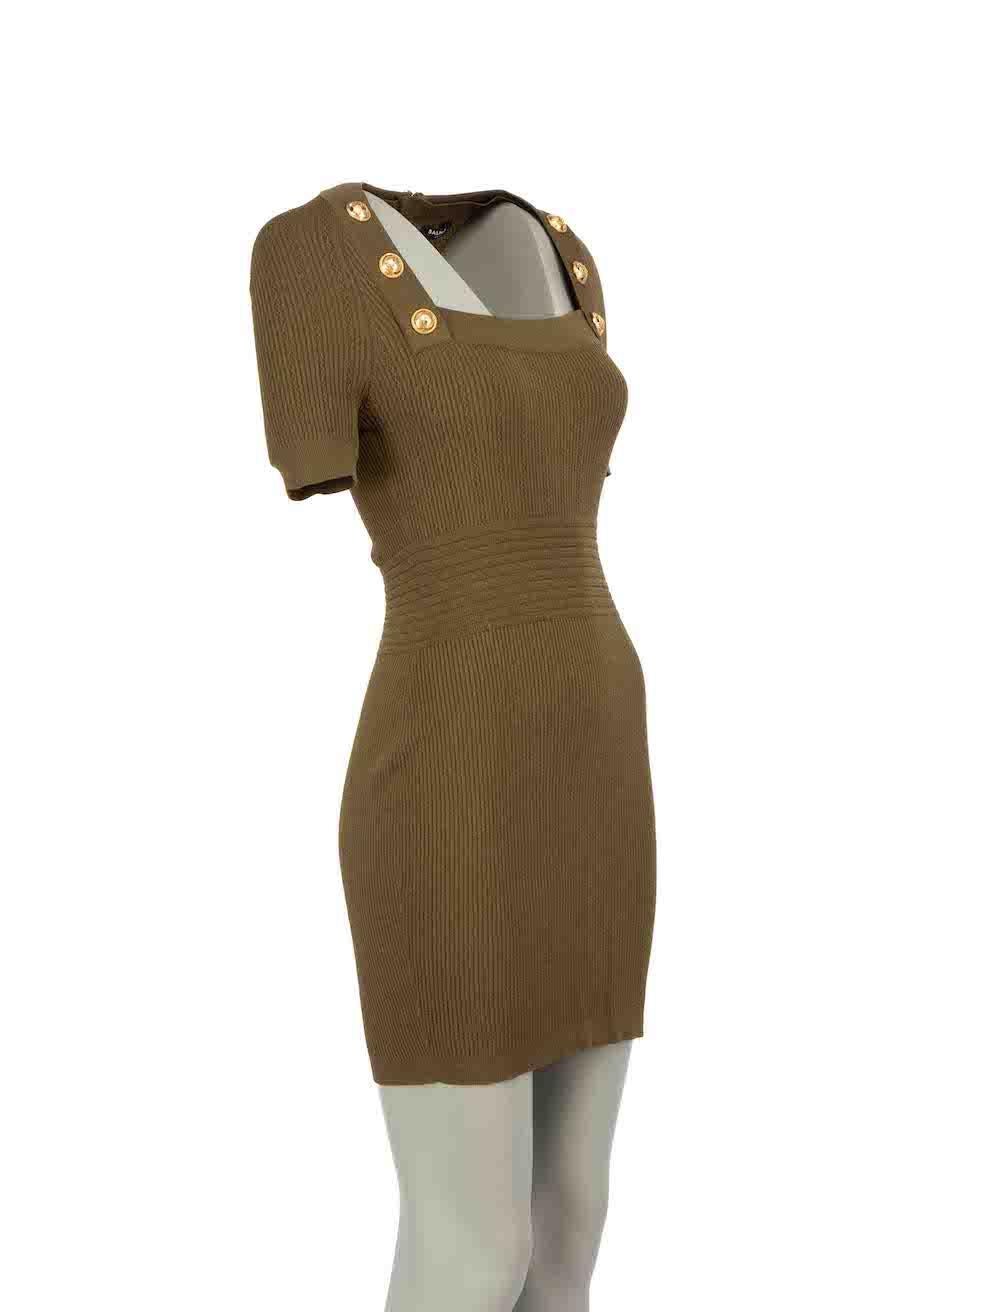 CONDITION is Very good. Minimal wear to dress is evident. Minimal wear to the rear and lining with pulls to the knit. Stains is evident to the rear neckline on this used Balmain designer resale item.
 
Details
Khaki
Viscose
Mini dress
Knitted and